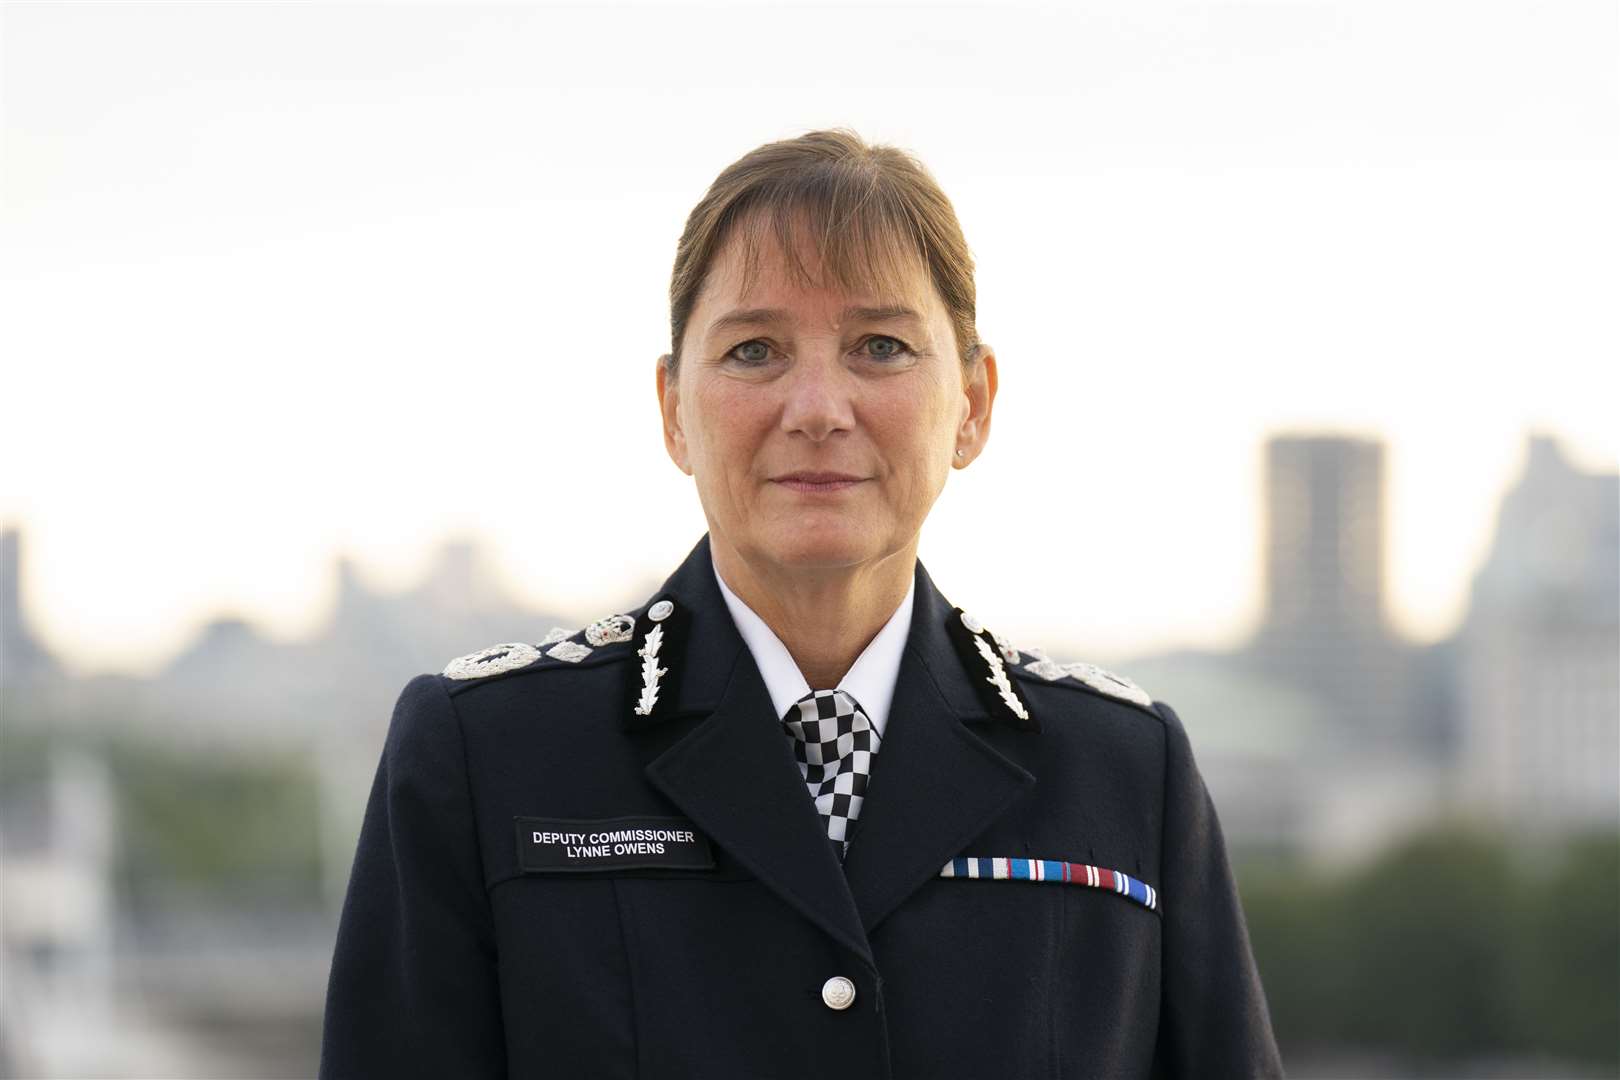 Deputy Commissioner Lynne Owens reiterated the Met’s independence (Kirsty O’Connor/PA)